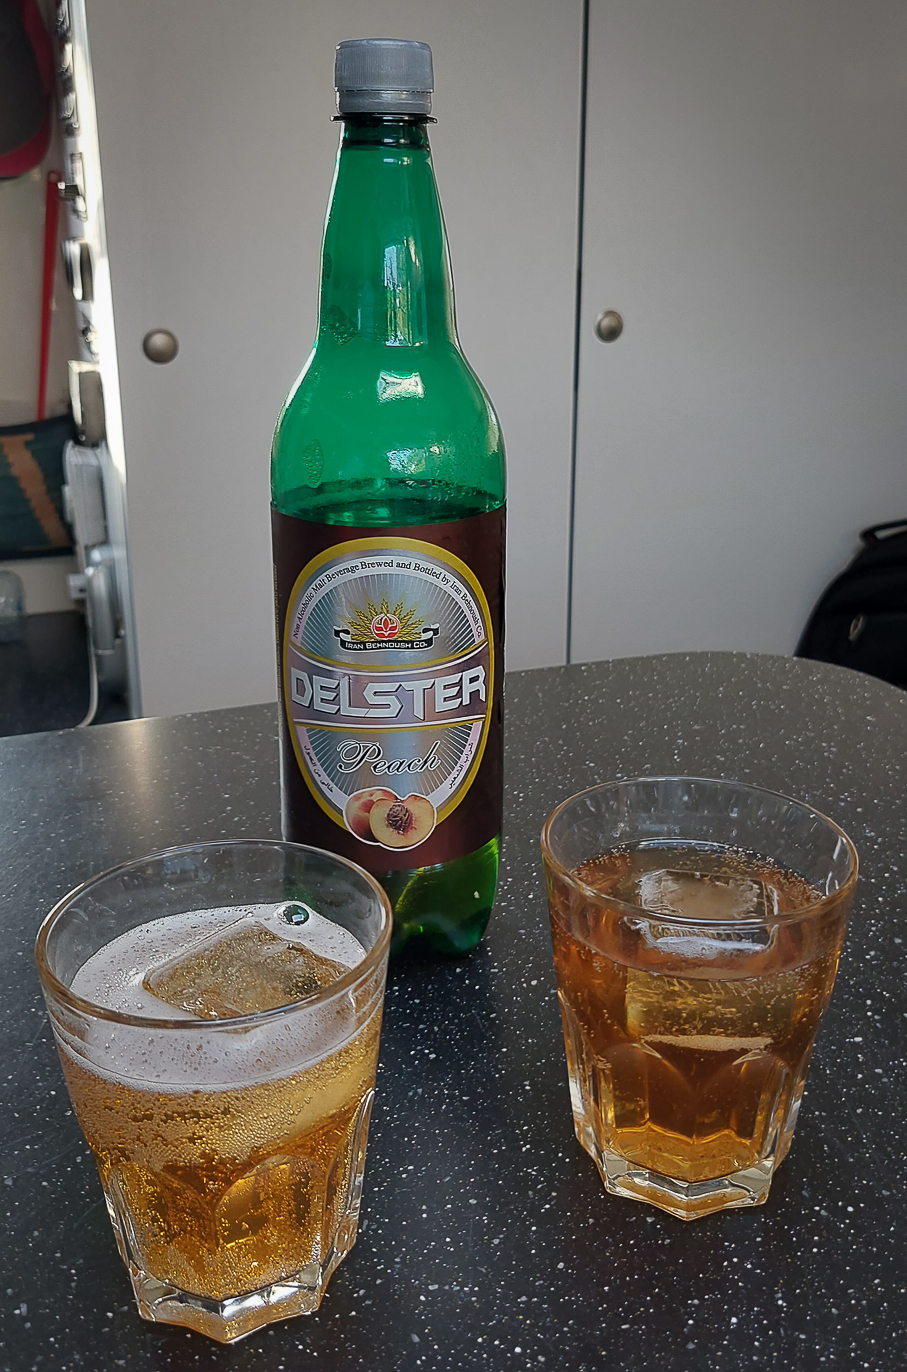 <span  class="uc_style_uc_tiles_grid_image_elementor_uc_items_attribute_title" style="color:#ffffff;">The (funny) alternative to German 'Alsterwasser': the Iranian 'Oelster' (non-alcoholic drink)</span>